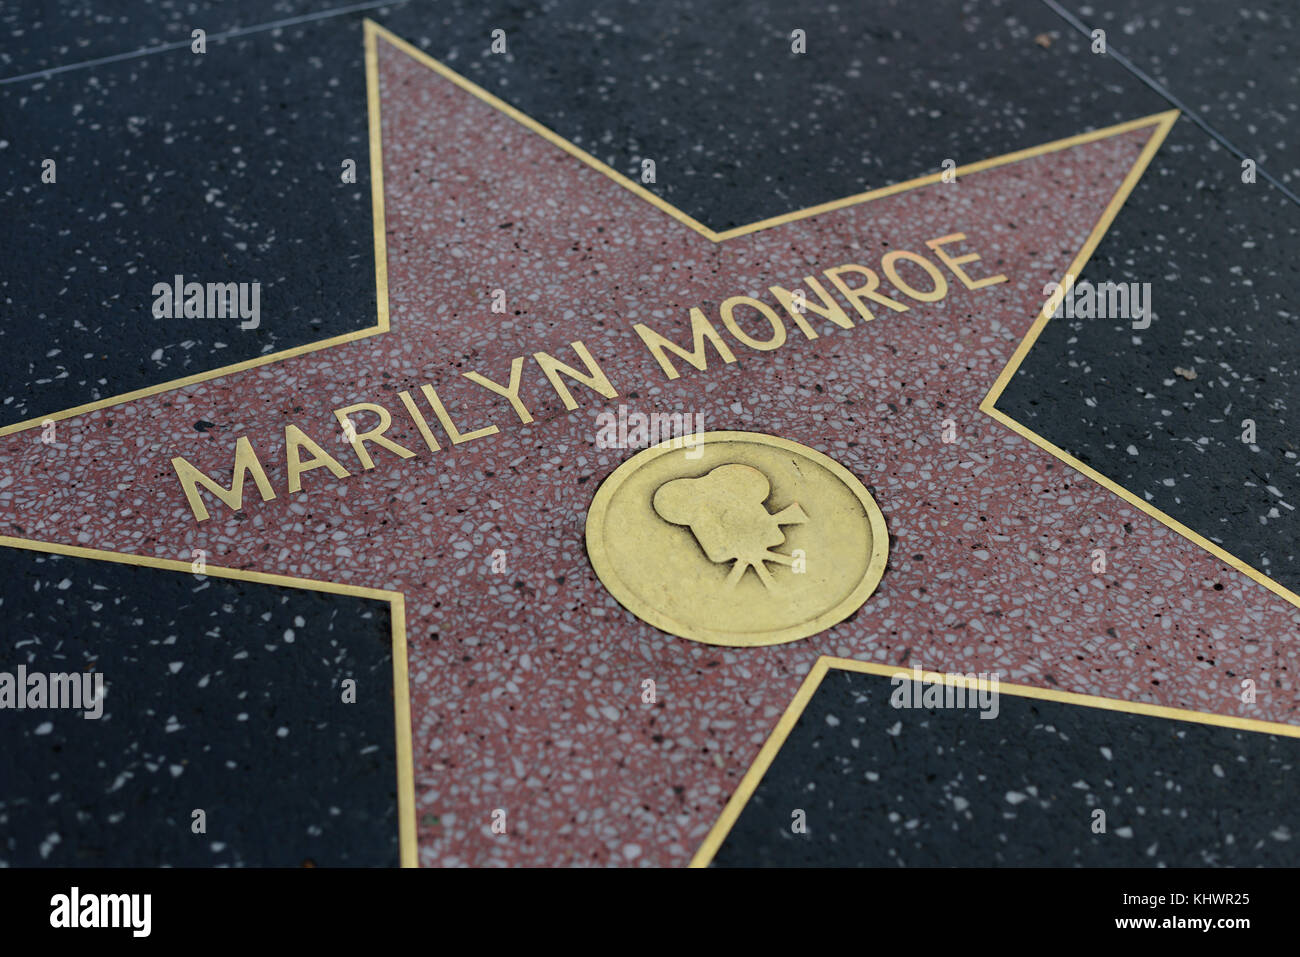 HOLLYWOOD, CA - DECEMBER 06: Marilyn Monroe star on the Hollywood Walk of Fame in Hollywood, California on Dec. 6, 2016. Stock Photo